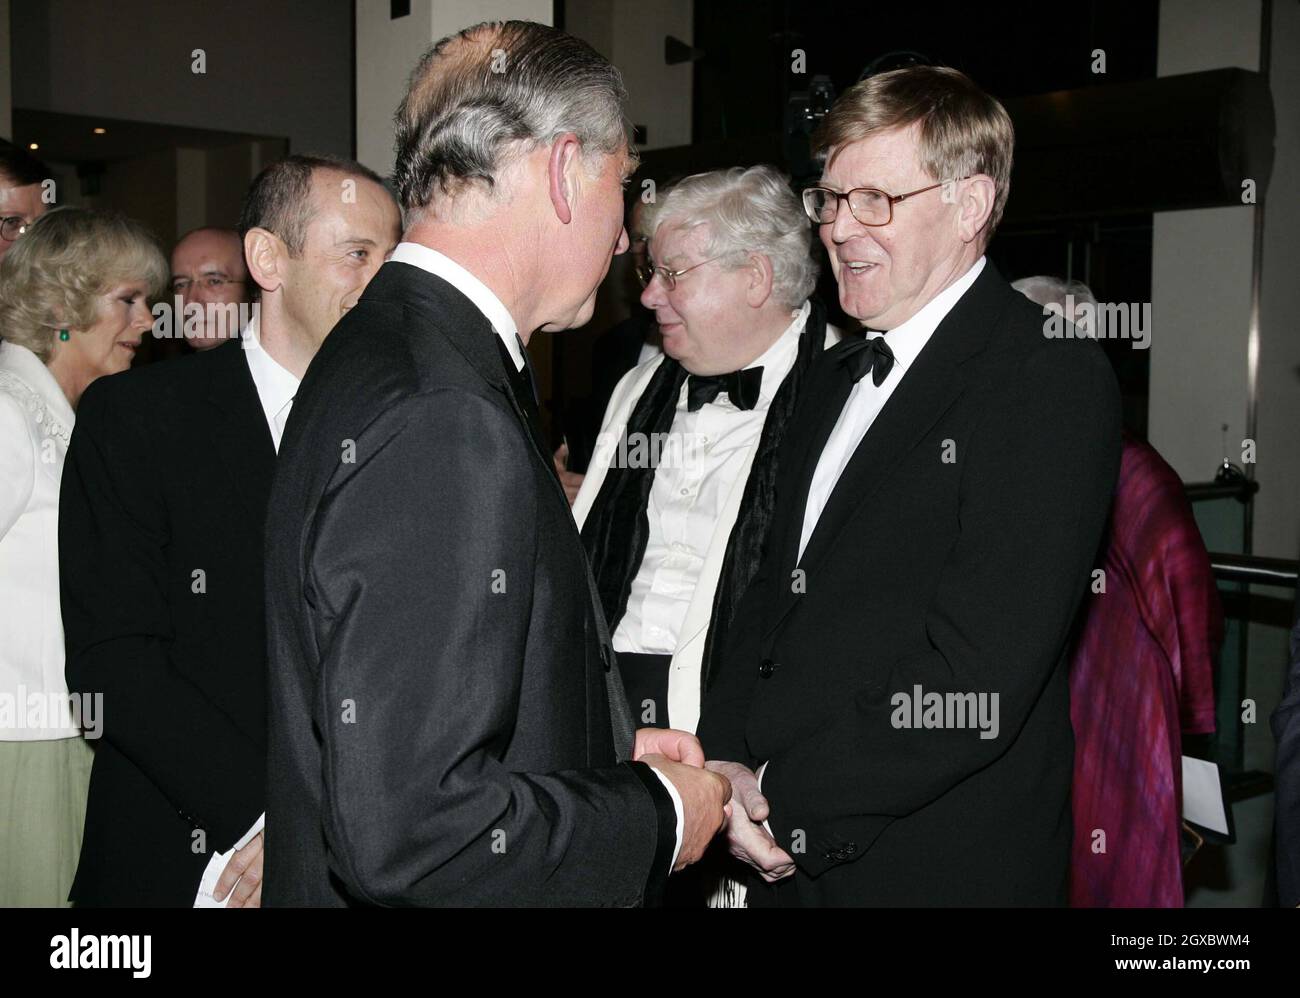 Prince Charles, Prince of Wales and Camilla, Duchess of Cornwall meet writer Alan Bennett and actor Richard Griffiths at the premiere of The History Boys in Leicester Square, London on October 2, 2006. Anwar Hussein/EMPICS Entertainment  Stock Photo